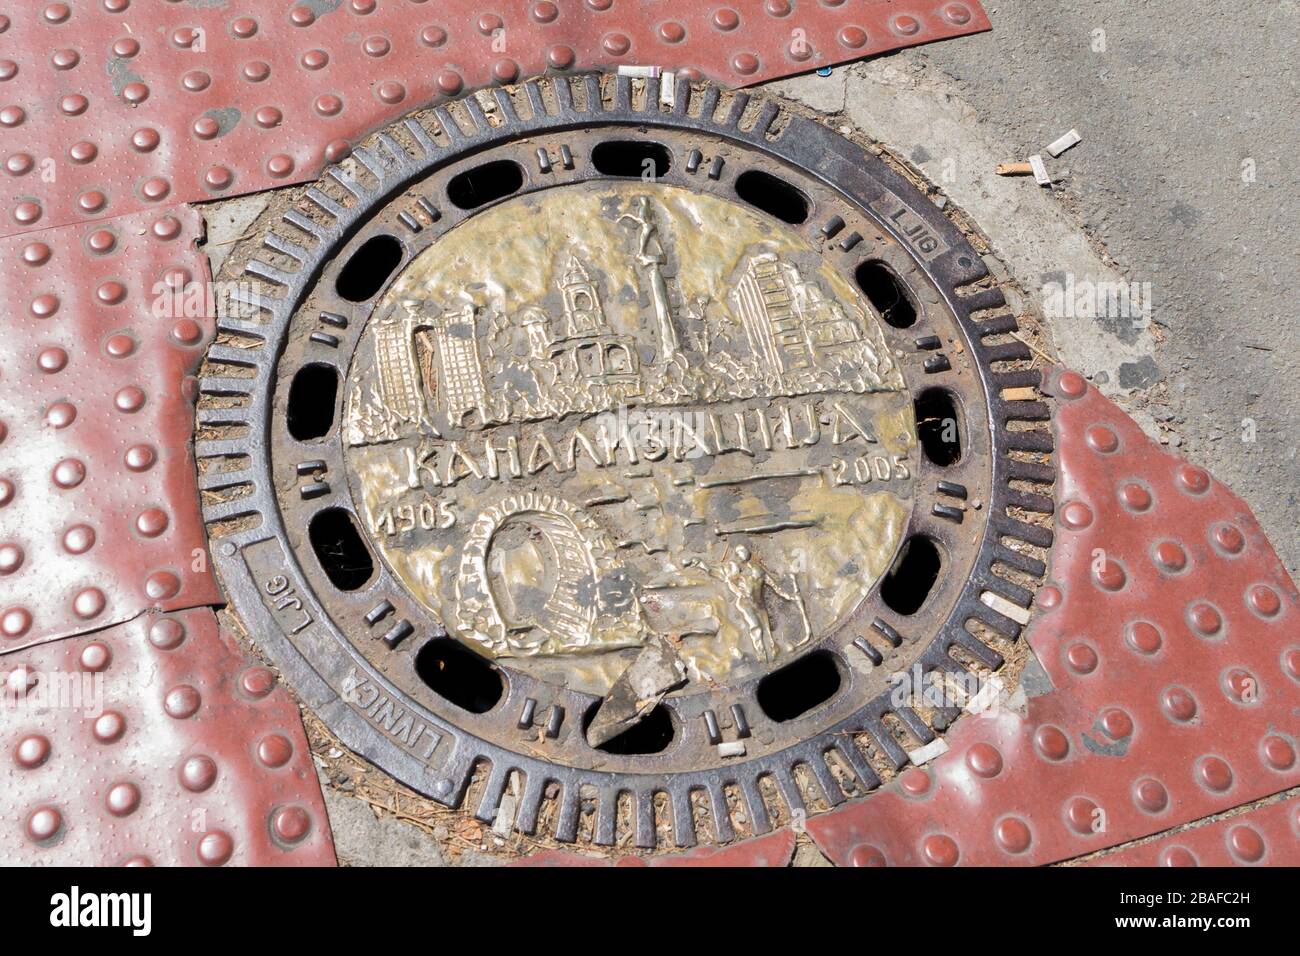 Manhole cover to commemorate the centenary of sewerage in 2005 in a street  of Belgrade, Serbia, Europe Stock Photo